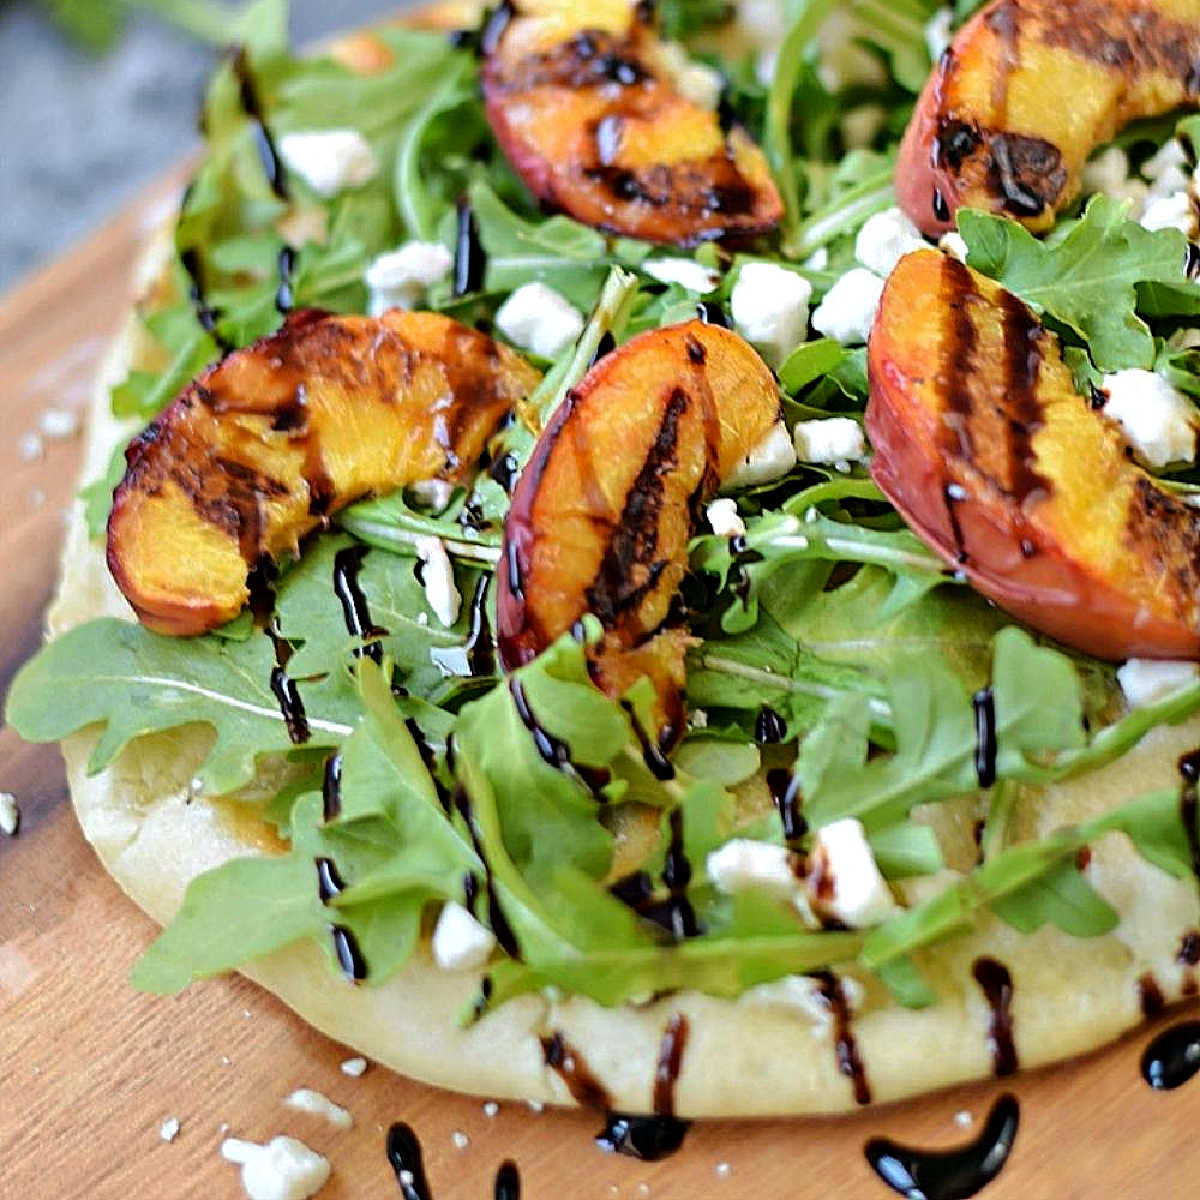 Pizza crust topped with arugula, grilled peaches, crumbled cheese and drizzled with balsamic glaze.